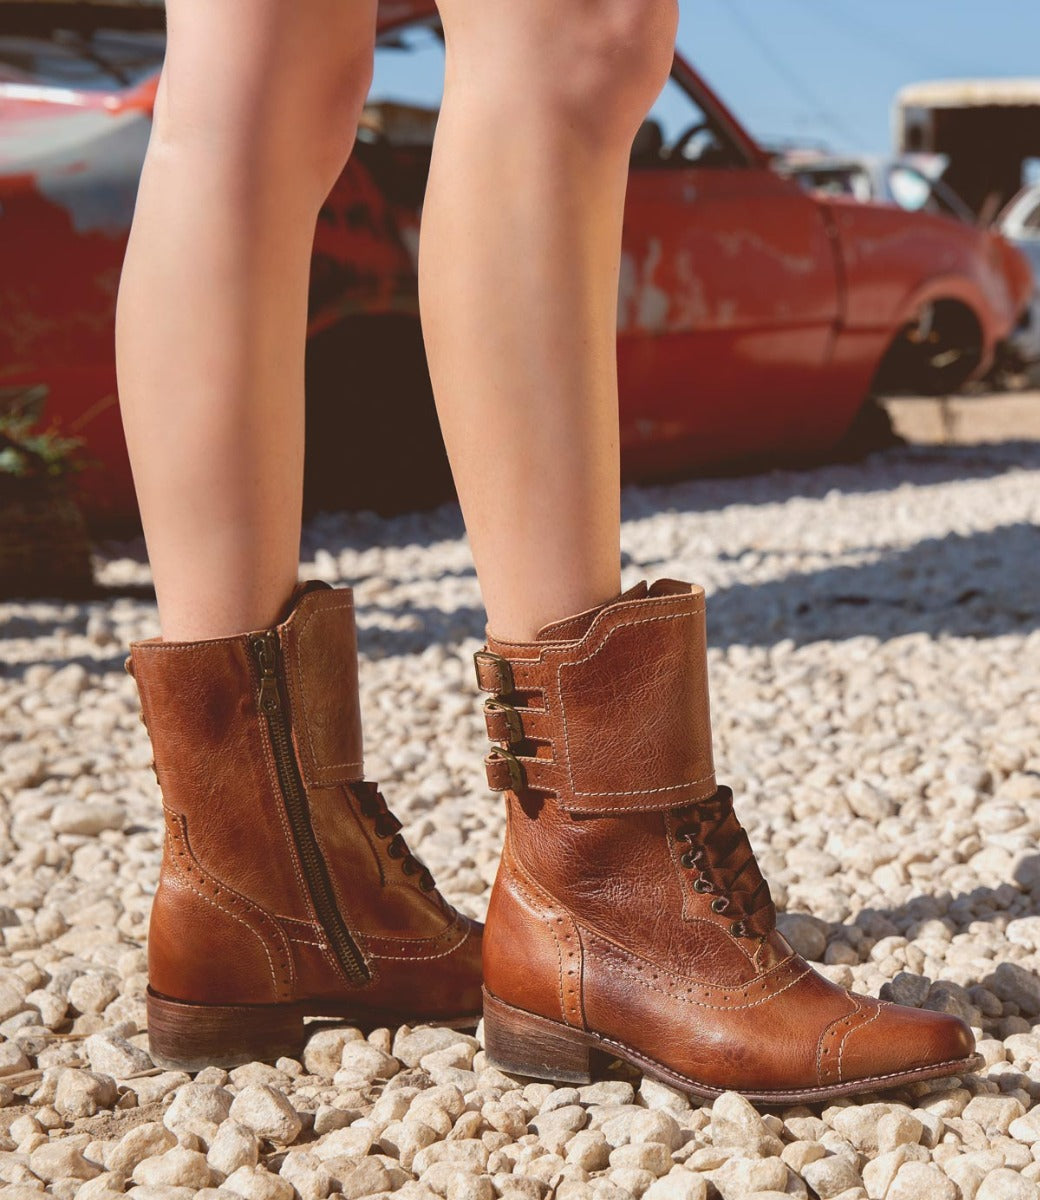 A woman's legs standing on gravel in a pair of Oak Tree Farms handcrafted brown riding boots named Faye.